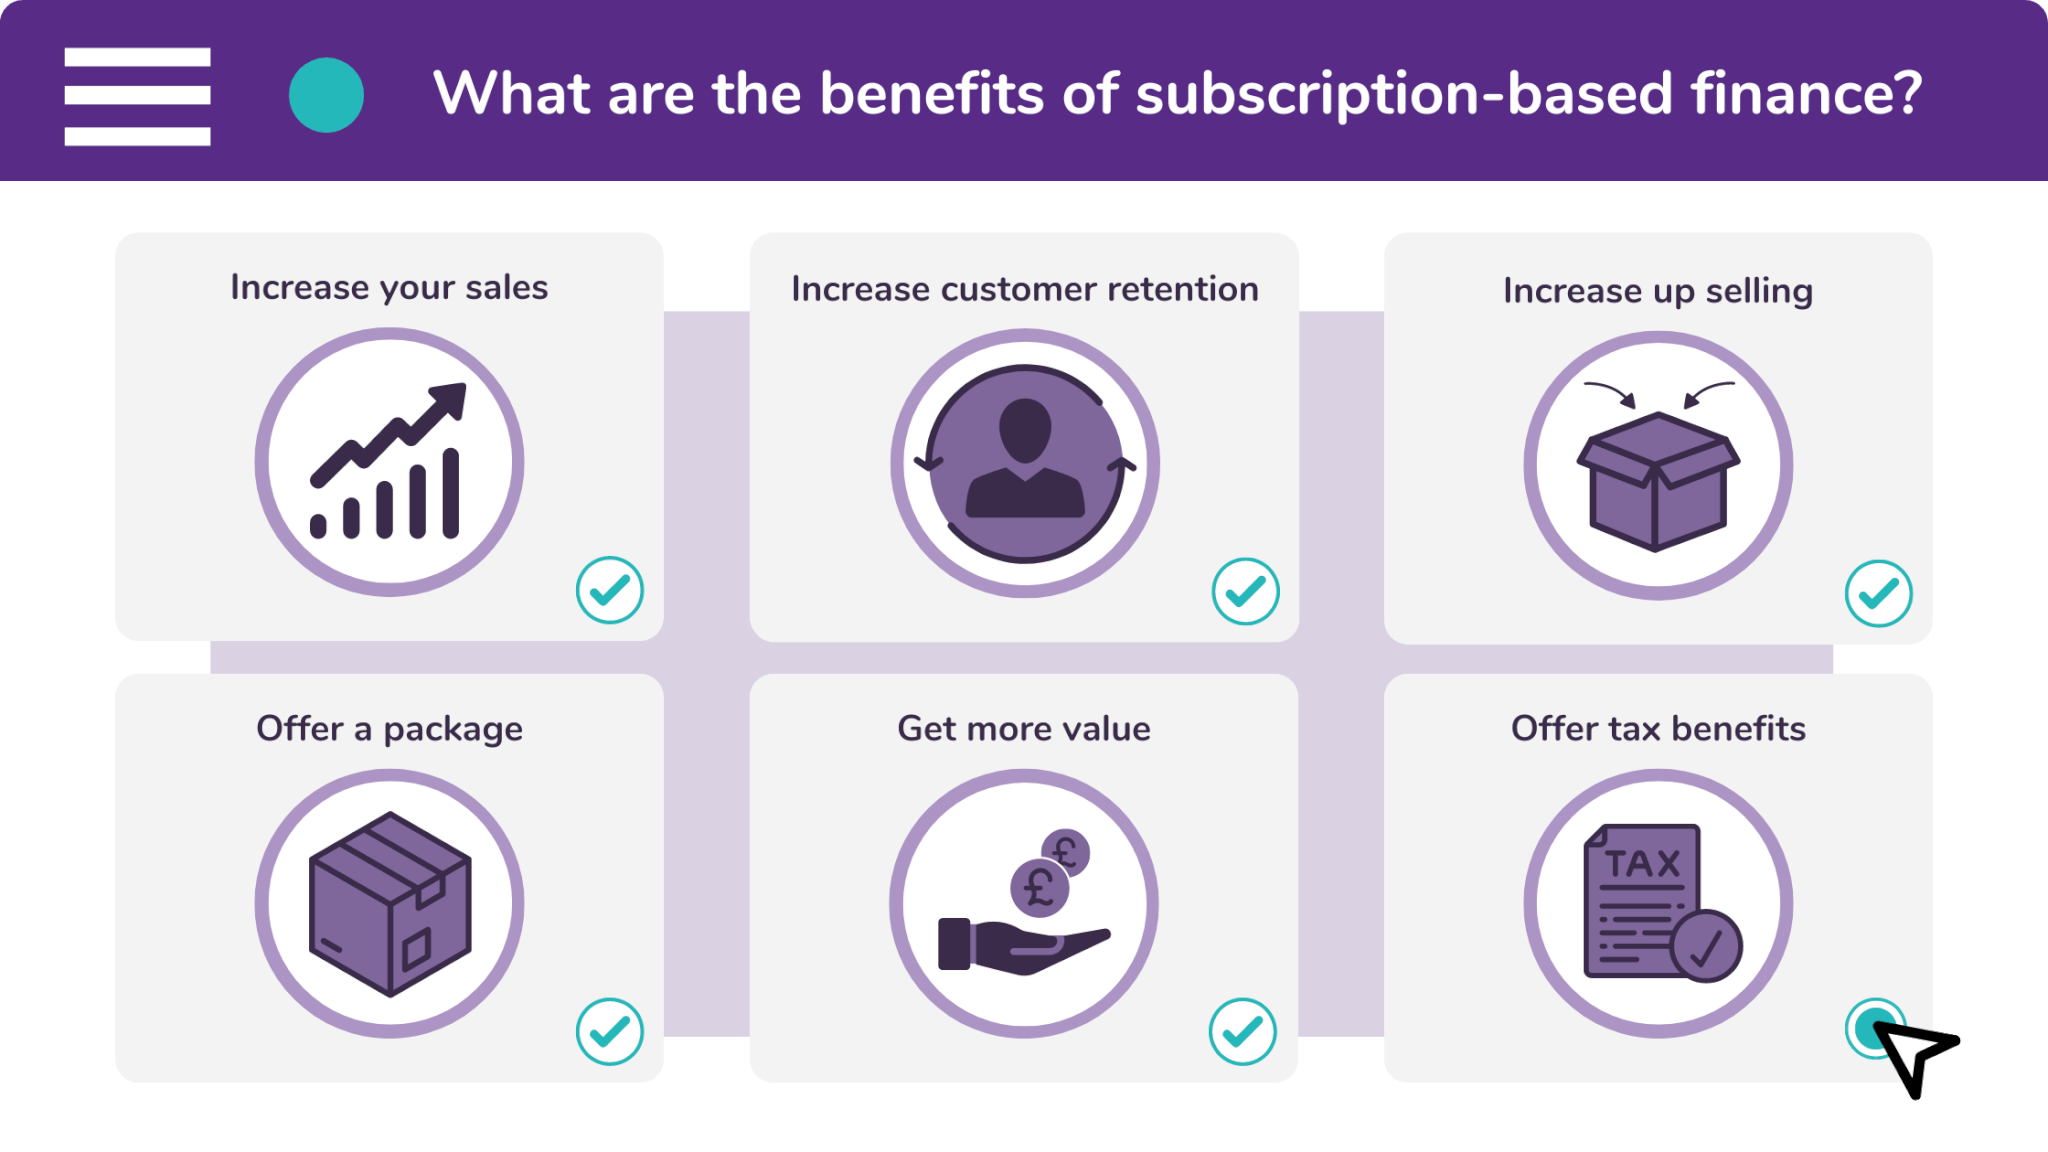 There are six benefits of offering subscription-based finance: increased sales, increase retention, increased up sells, the ability to offer a package, more value for the vendor, and tax benefits.